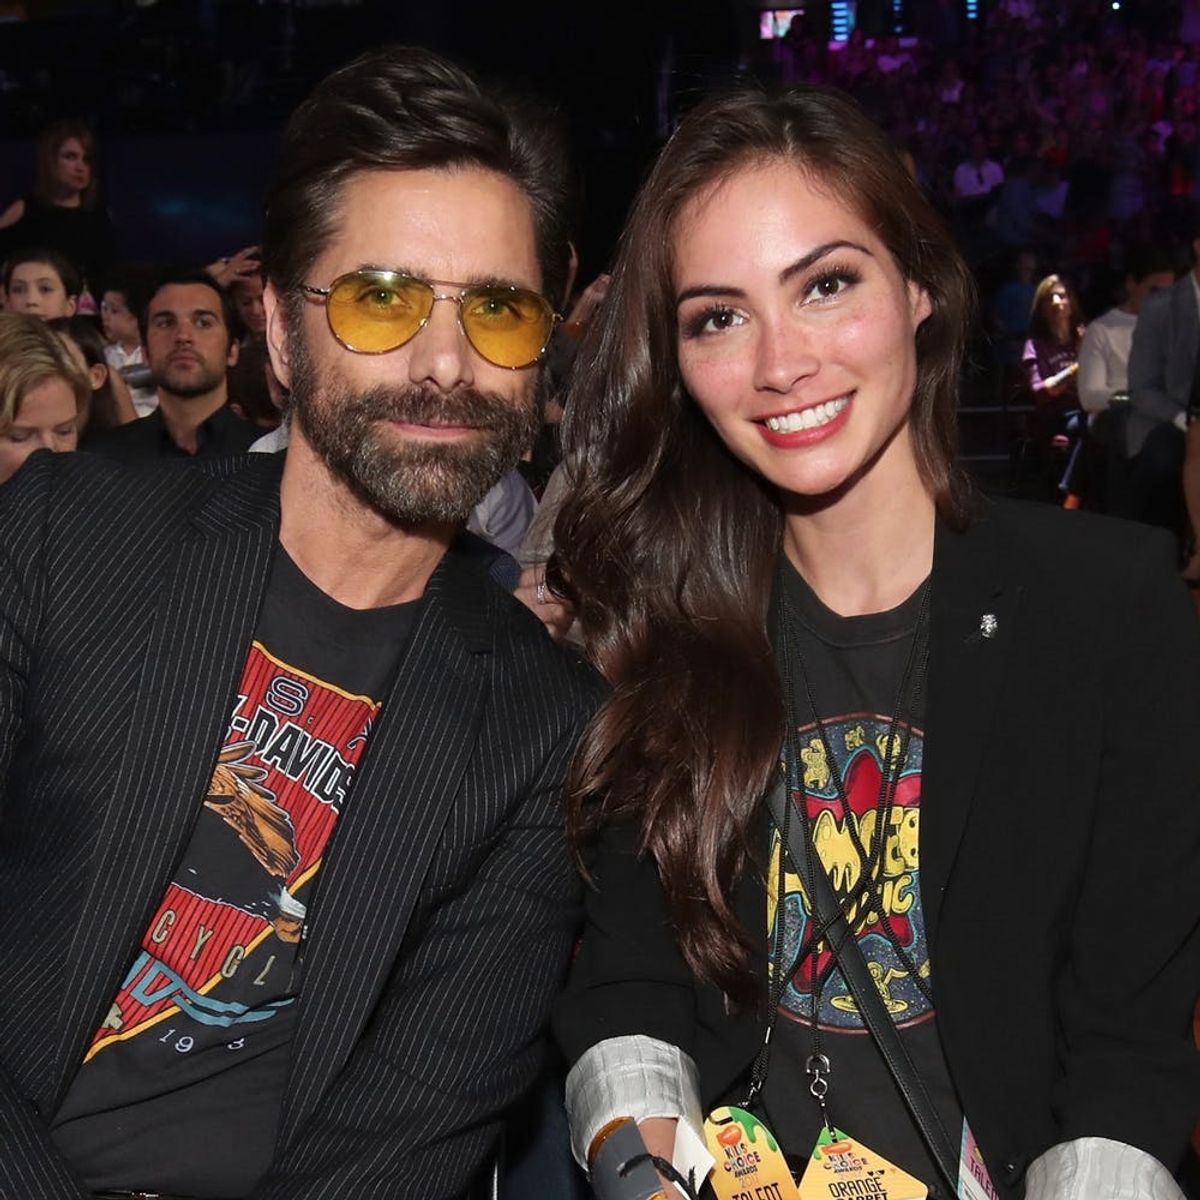 John Stamos and Caitlin McHugh Are Engaged! Get the Details on His Disneyland Proposal